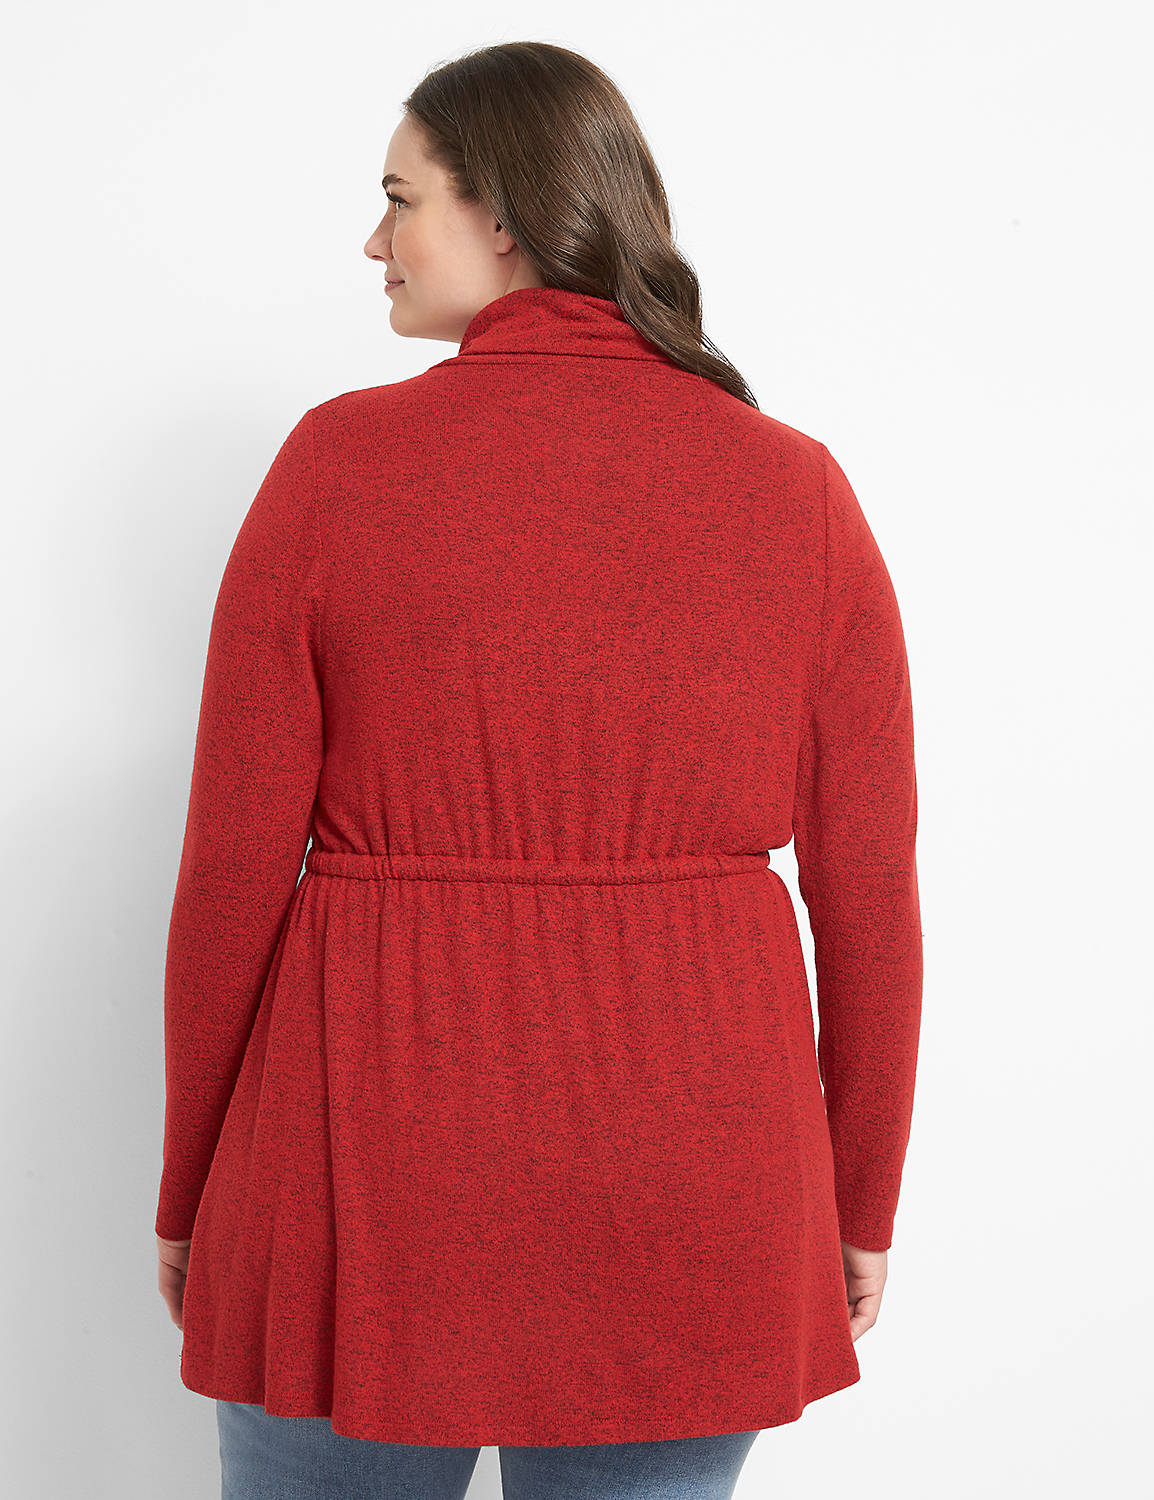 Long Sleeve Funnel Neck Drawcord Tunic In Solid Hacci 1123736:PANTONE Haute Red:10/12 Product Image 2